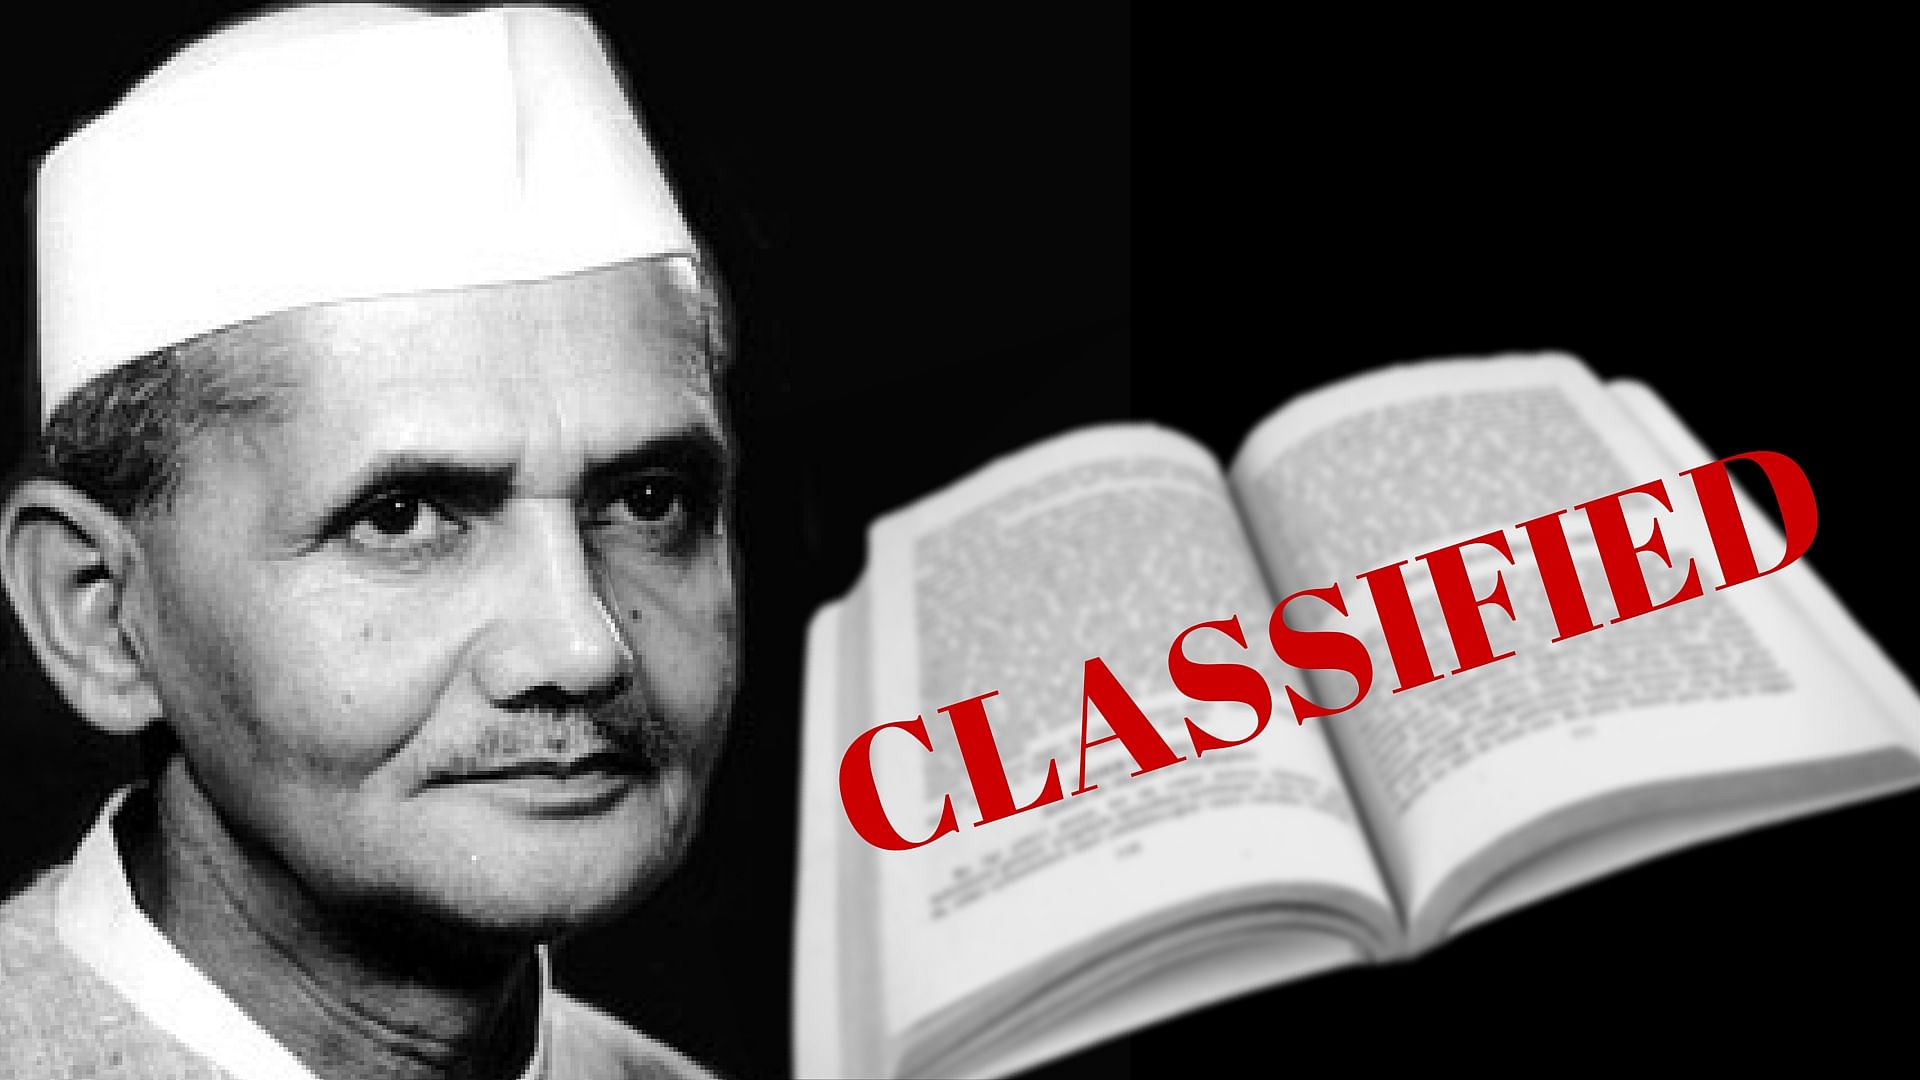 <div class="paragraphs"><p>The country’s second Prime Minister Lal Bahadur Shastri died under mysterious circumstances in Tashkent, Uzbekistan on January 10, 1966.</p></div>